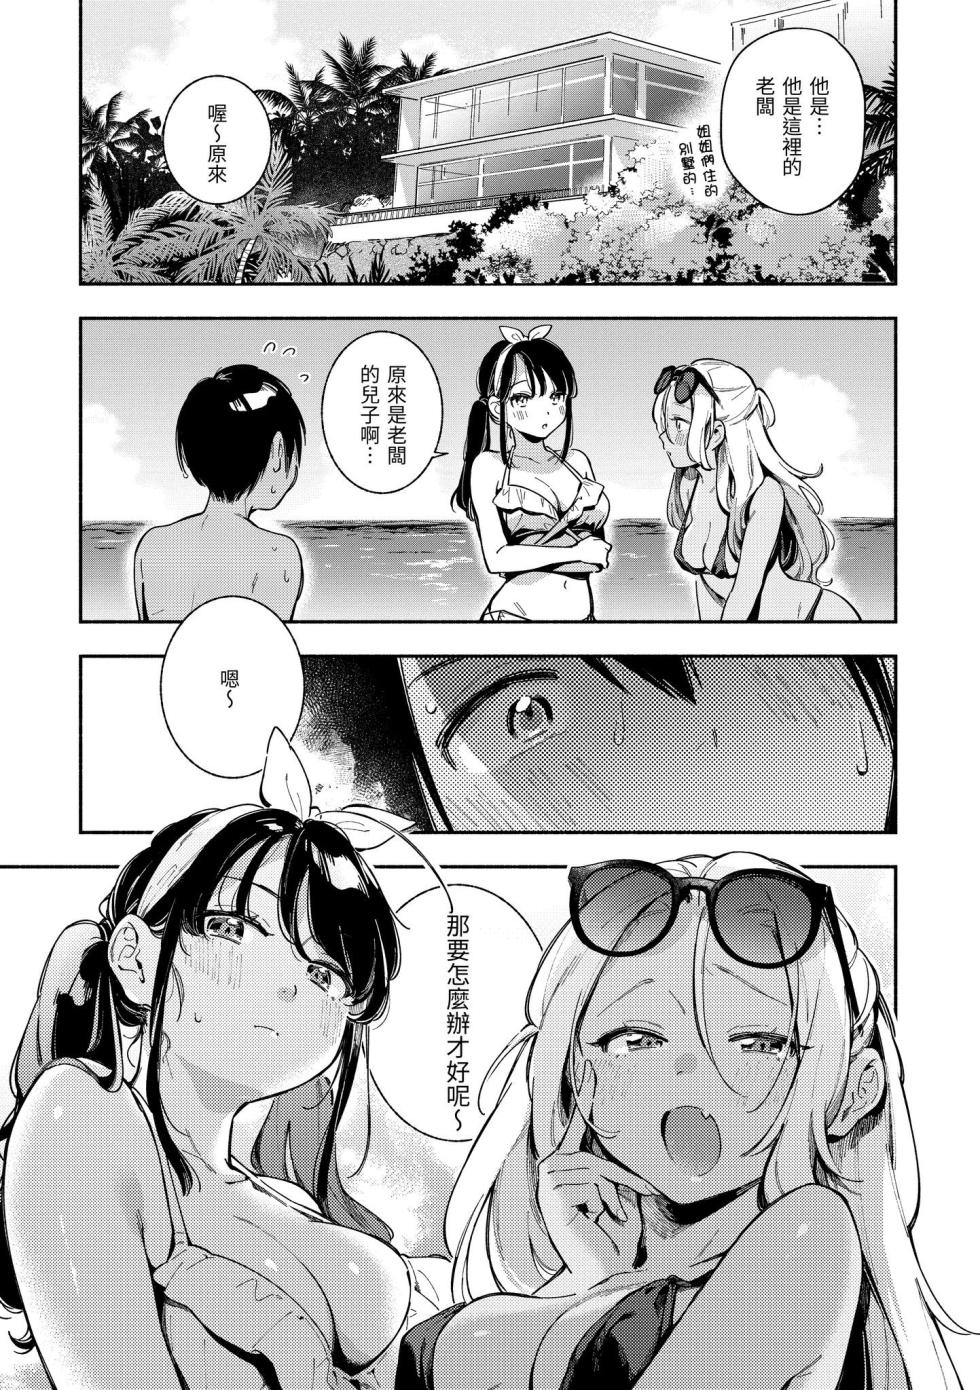 [Wantan Meo] Gochisousama - That was delicious. | 謝謝招待 [Chinese] [Decensored] - Page 8